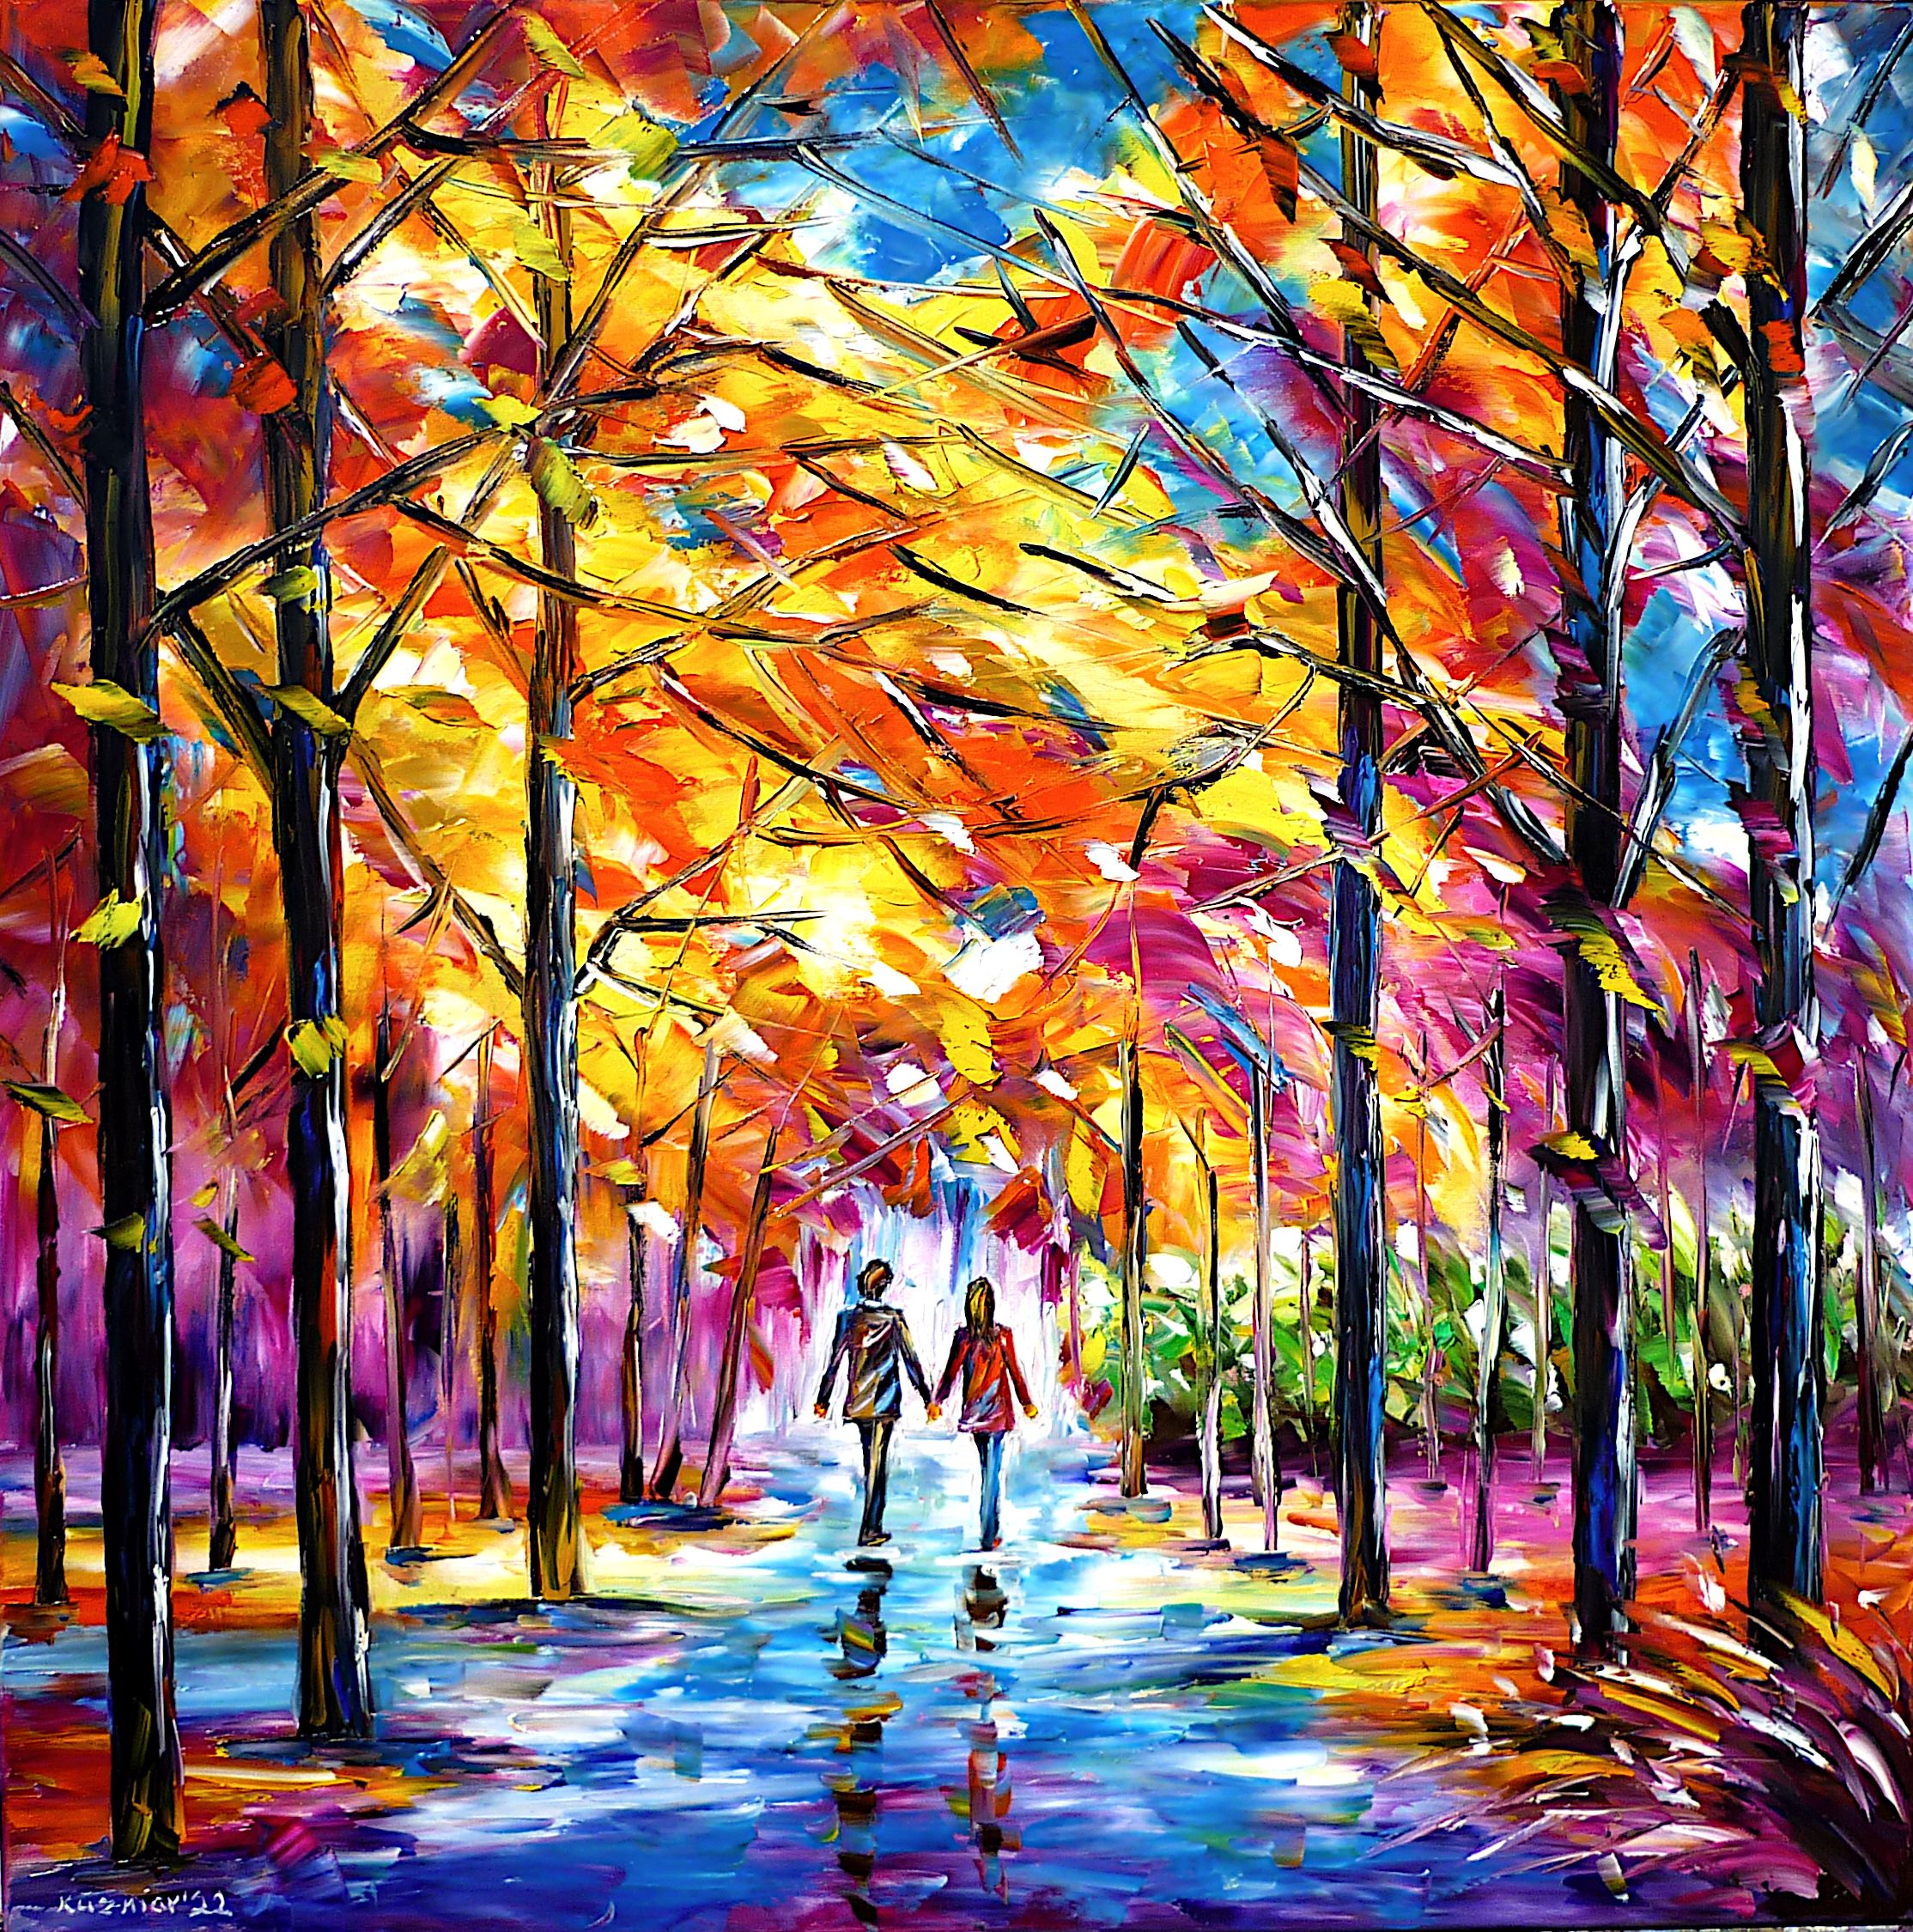 colorful autumn park,loving couple in autumn,lovers in autumn,autumn walk,park walk,people in love,lovers in the park,walking in the park,hand in hand,holding hands,love,autumn mood,romantic,romantic scene,romantic day,I love you,autumn joy,people in the park,People in autumn,colourful,mood,autumn lovers,I love autumn,park landscape,autumn landscape,autumn trees,colorful autumn,lively autumn,autumn colors,autumn painting,autumn picture,sunny autumn day,autumn abstract,red autumn,autumn leaves,autumn beauty,autumn impression,autumn light,autumn,autumn love,landscape painting,square format,square picture,square painting,pink colors,pink yellow red blue,palette knife oil painting,modern art,impressionism,expressionism,abstract painting,lively colors,colorful painting,bright colors,light reflections,impasto painting,figurative